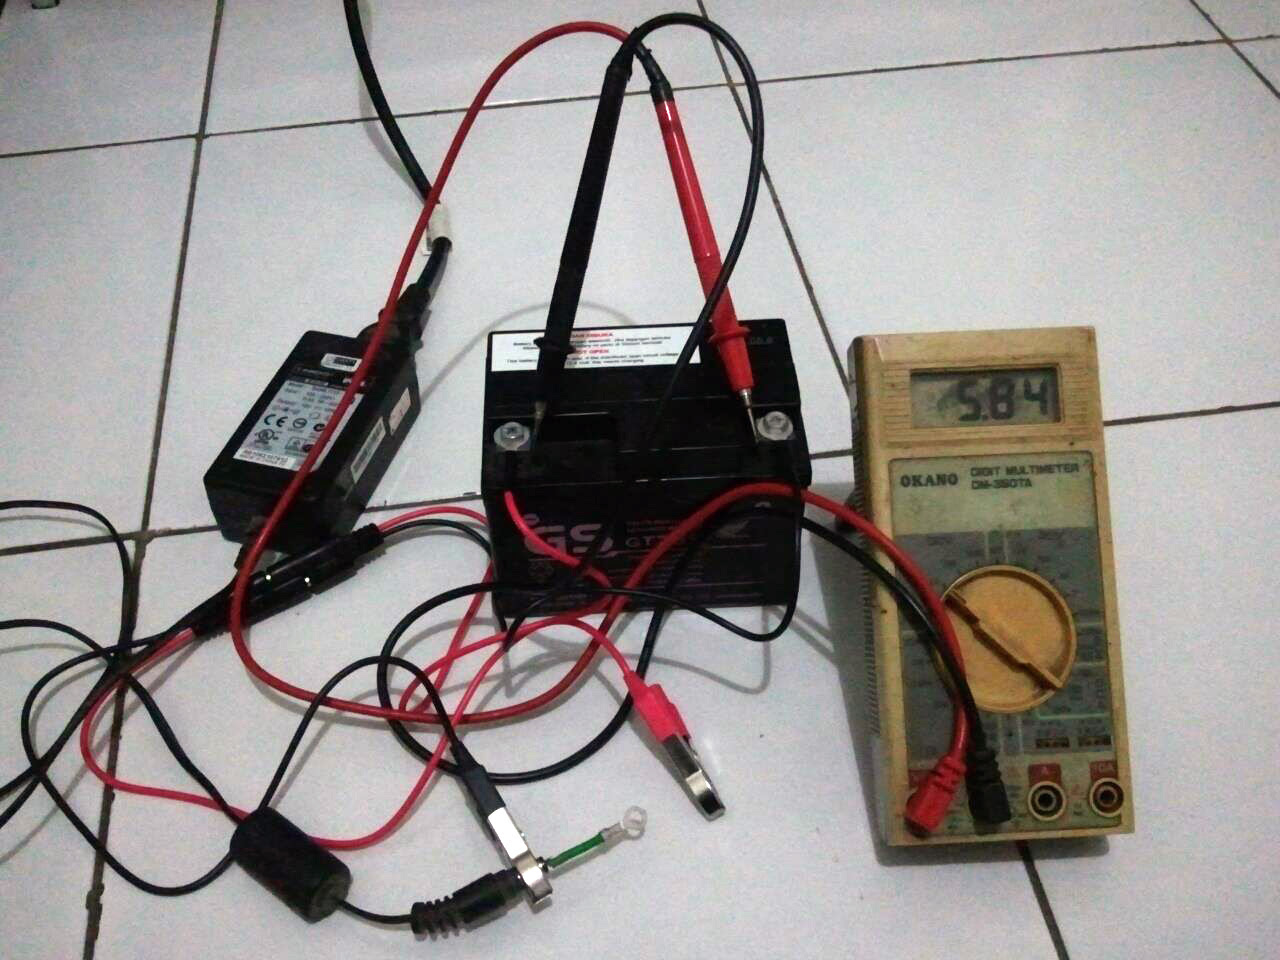  Charger  Laptop Untuk Cas Aki  Motor  CHARGER  ABOUT